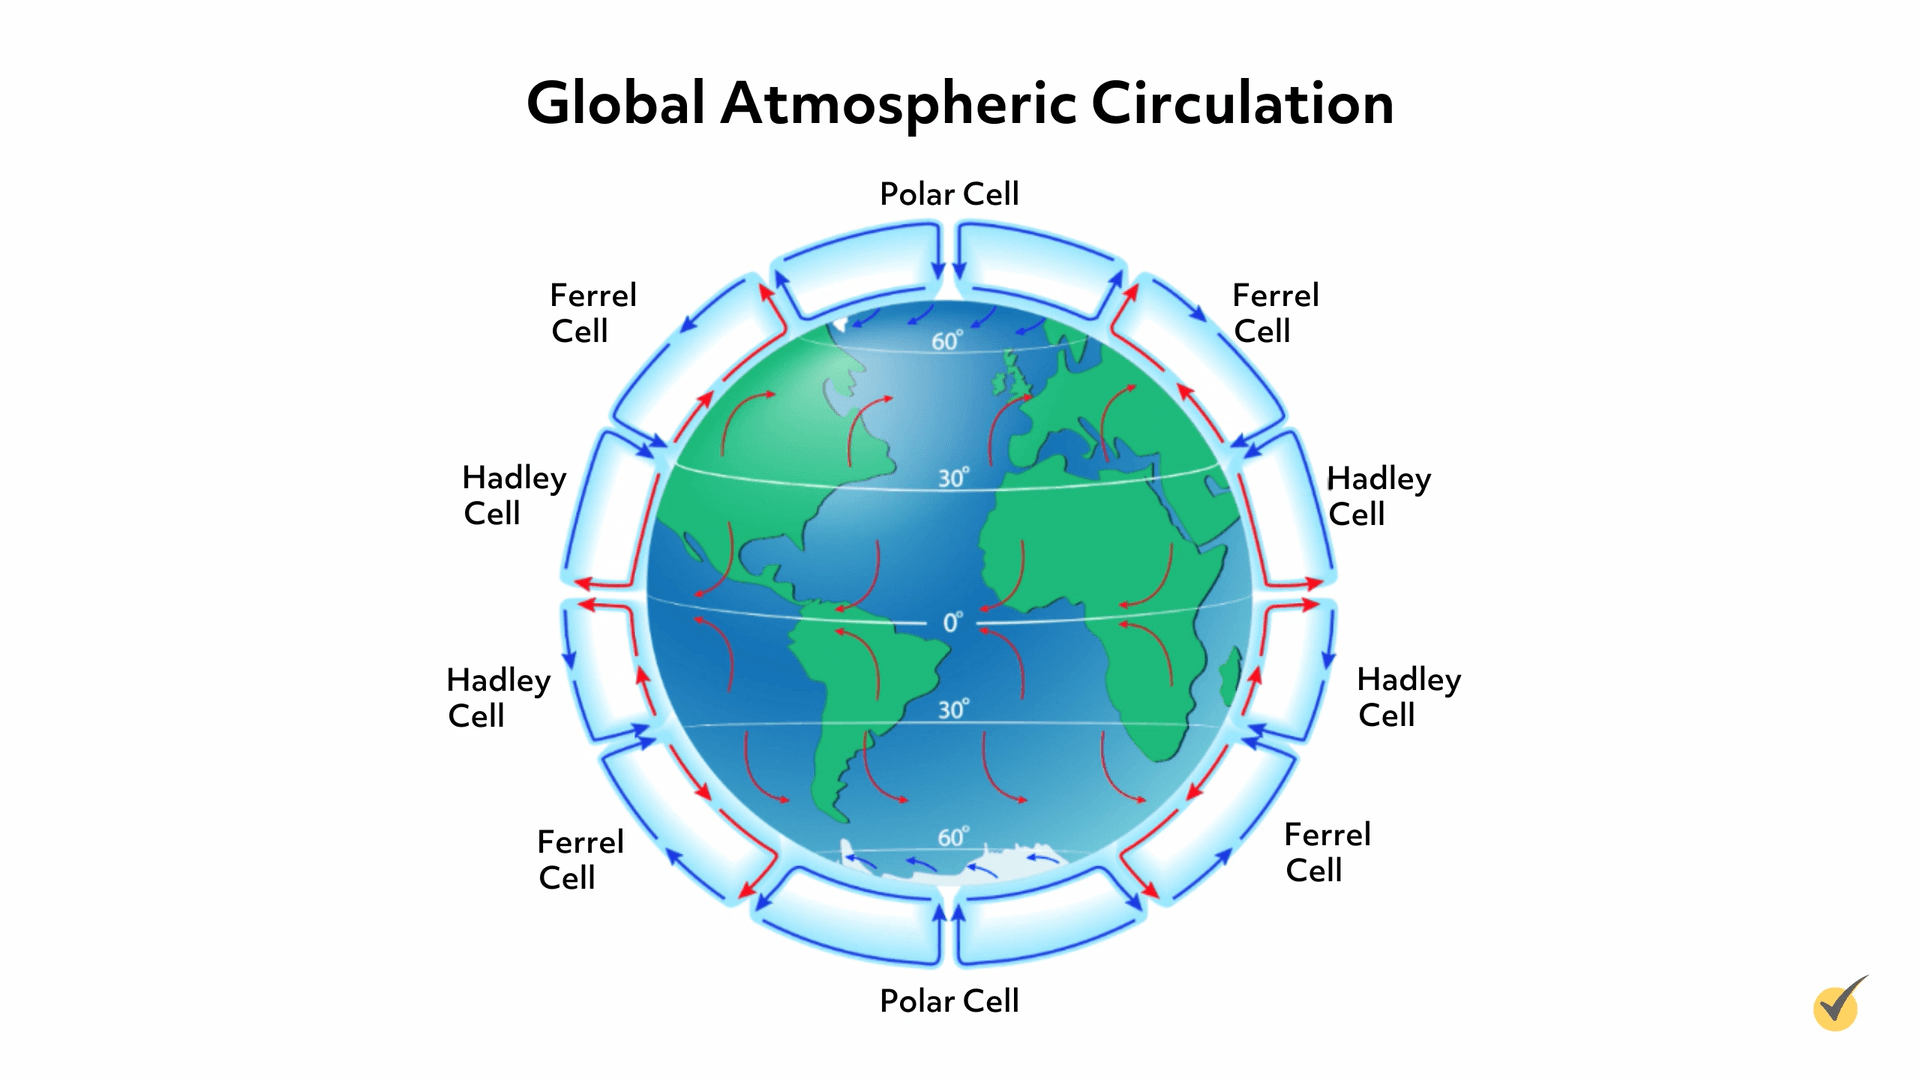 Image of Global Atmospheric Circulation broken up into convection cells. The top cells are Polar cells, mid-latitudes are Ferrel cells, and low latitudes have Hadley cells.